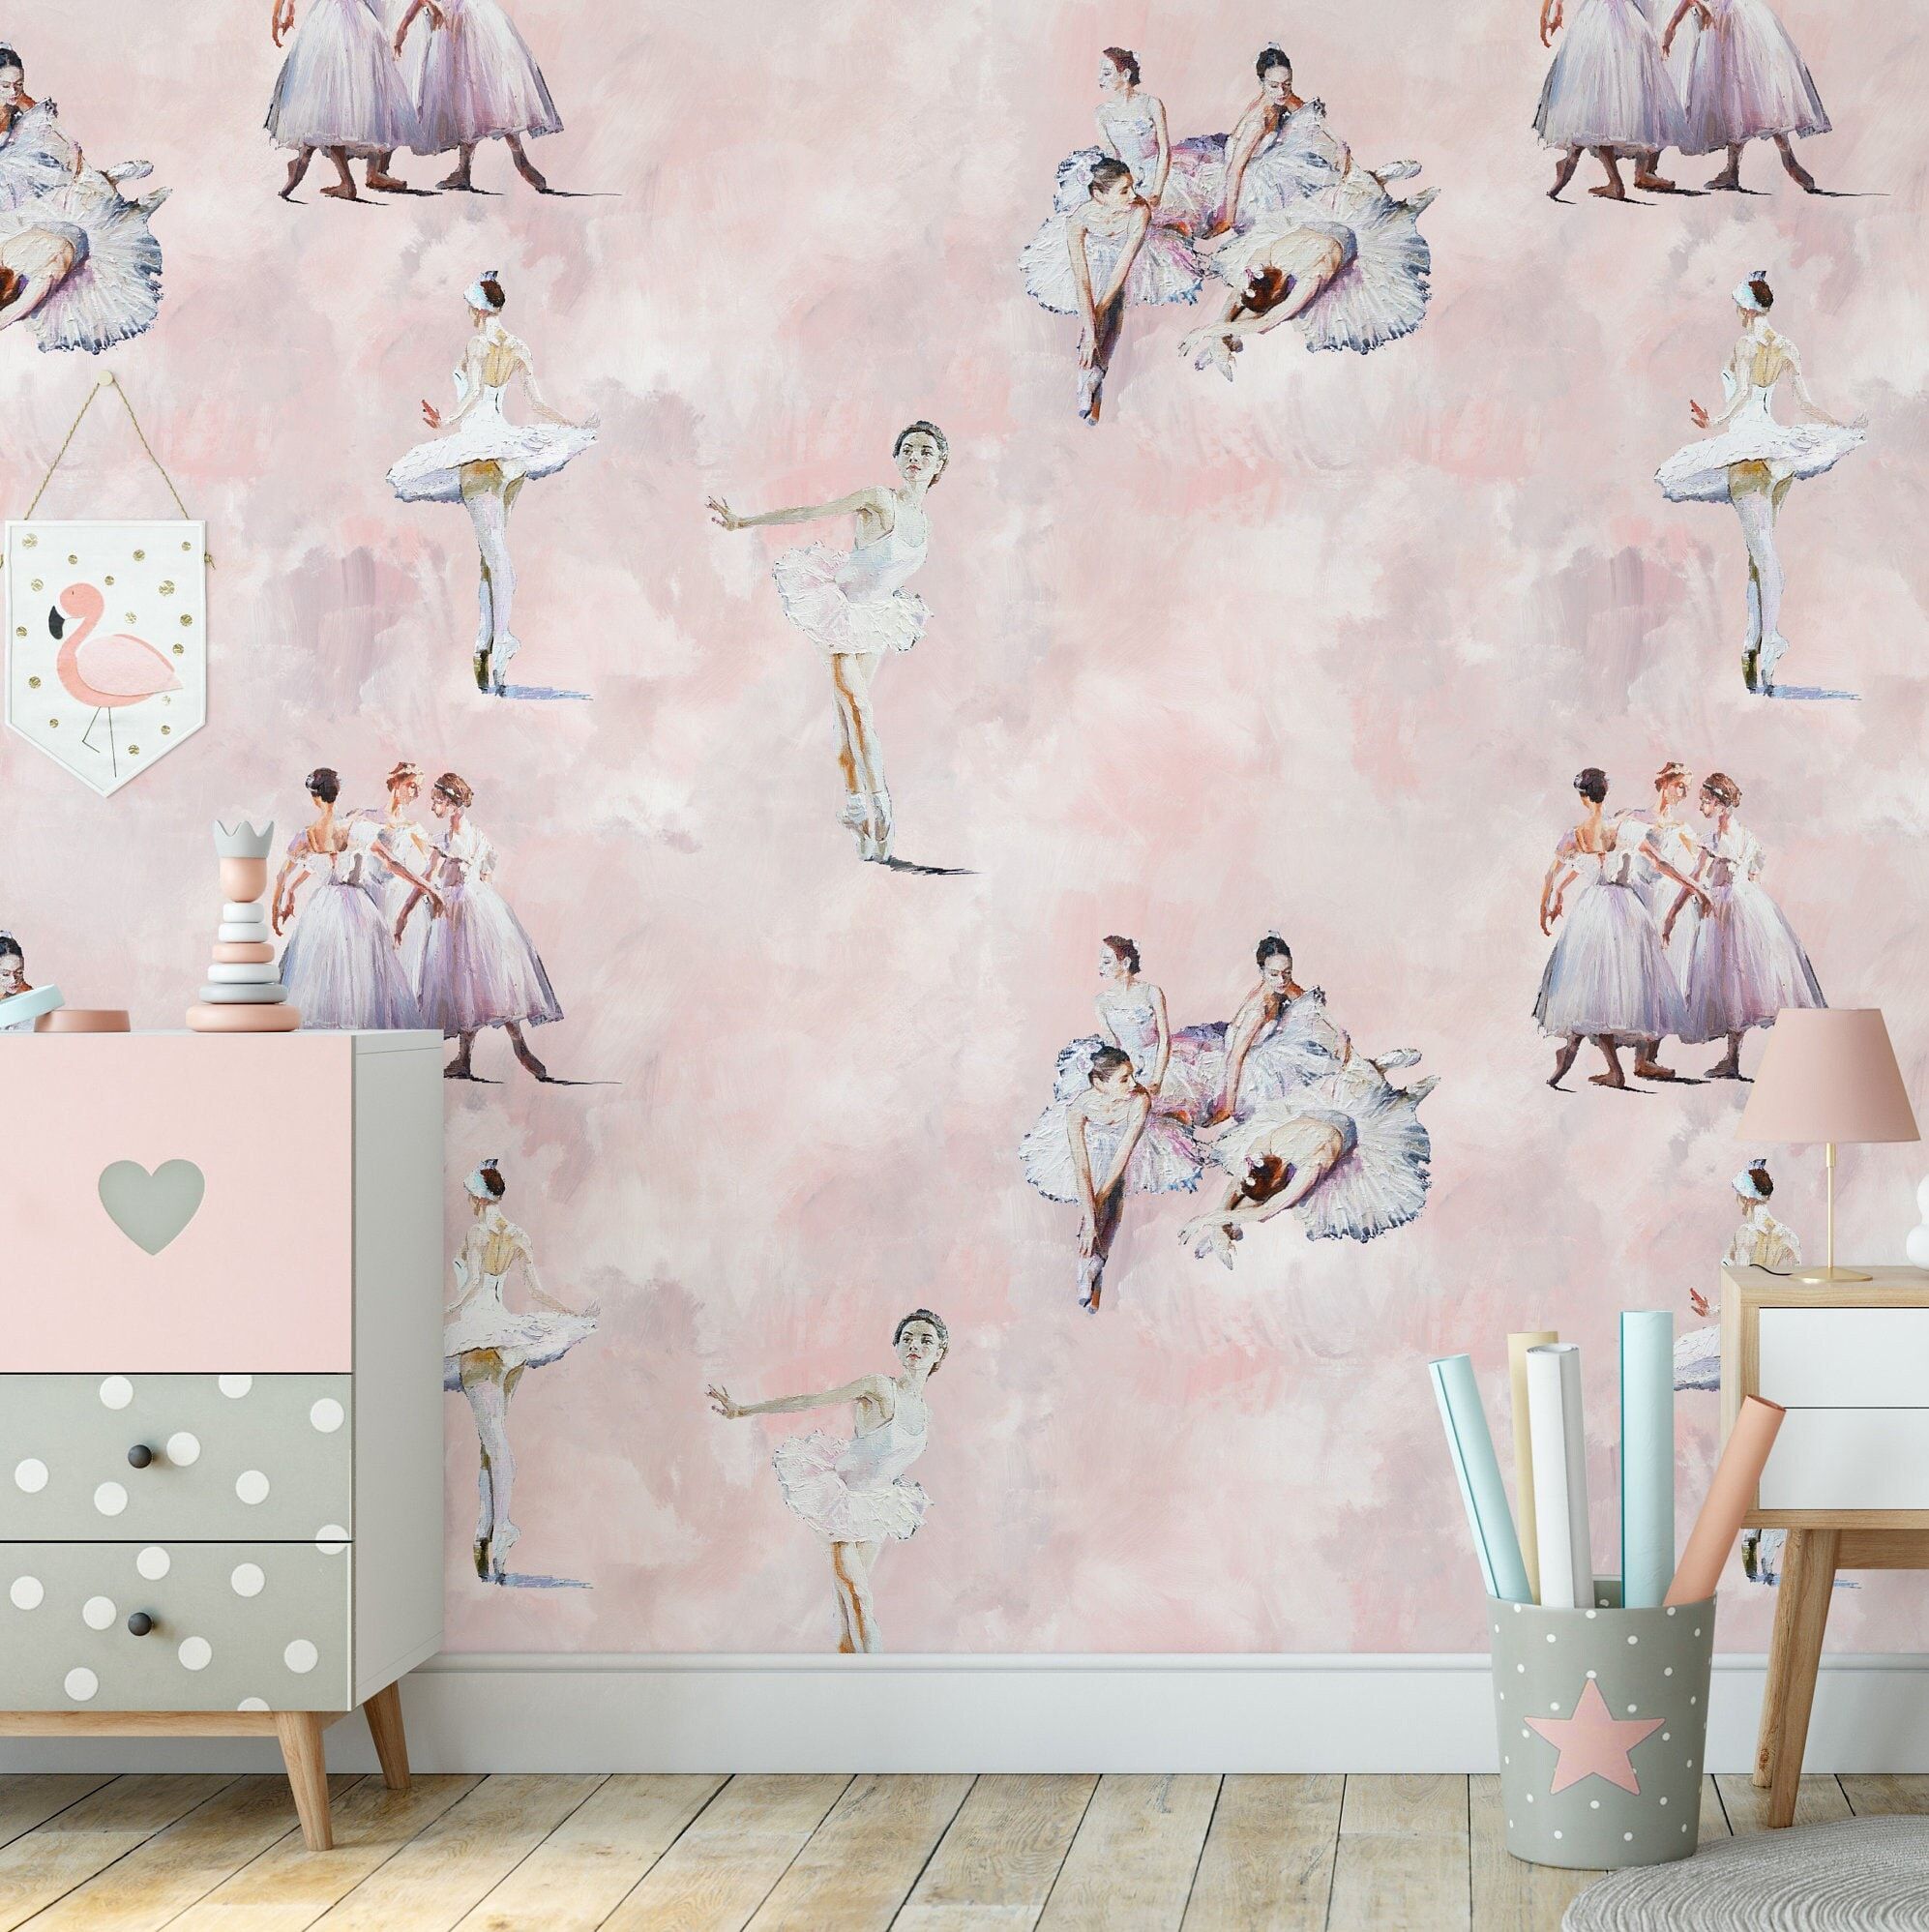 A room with pink walls and ballet dancers - Ballet